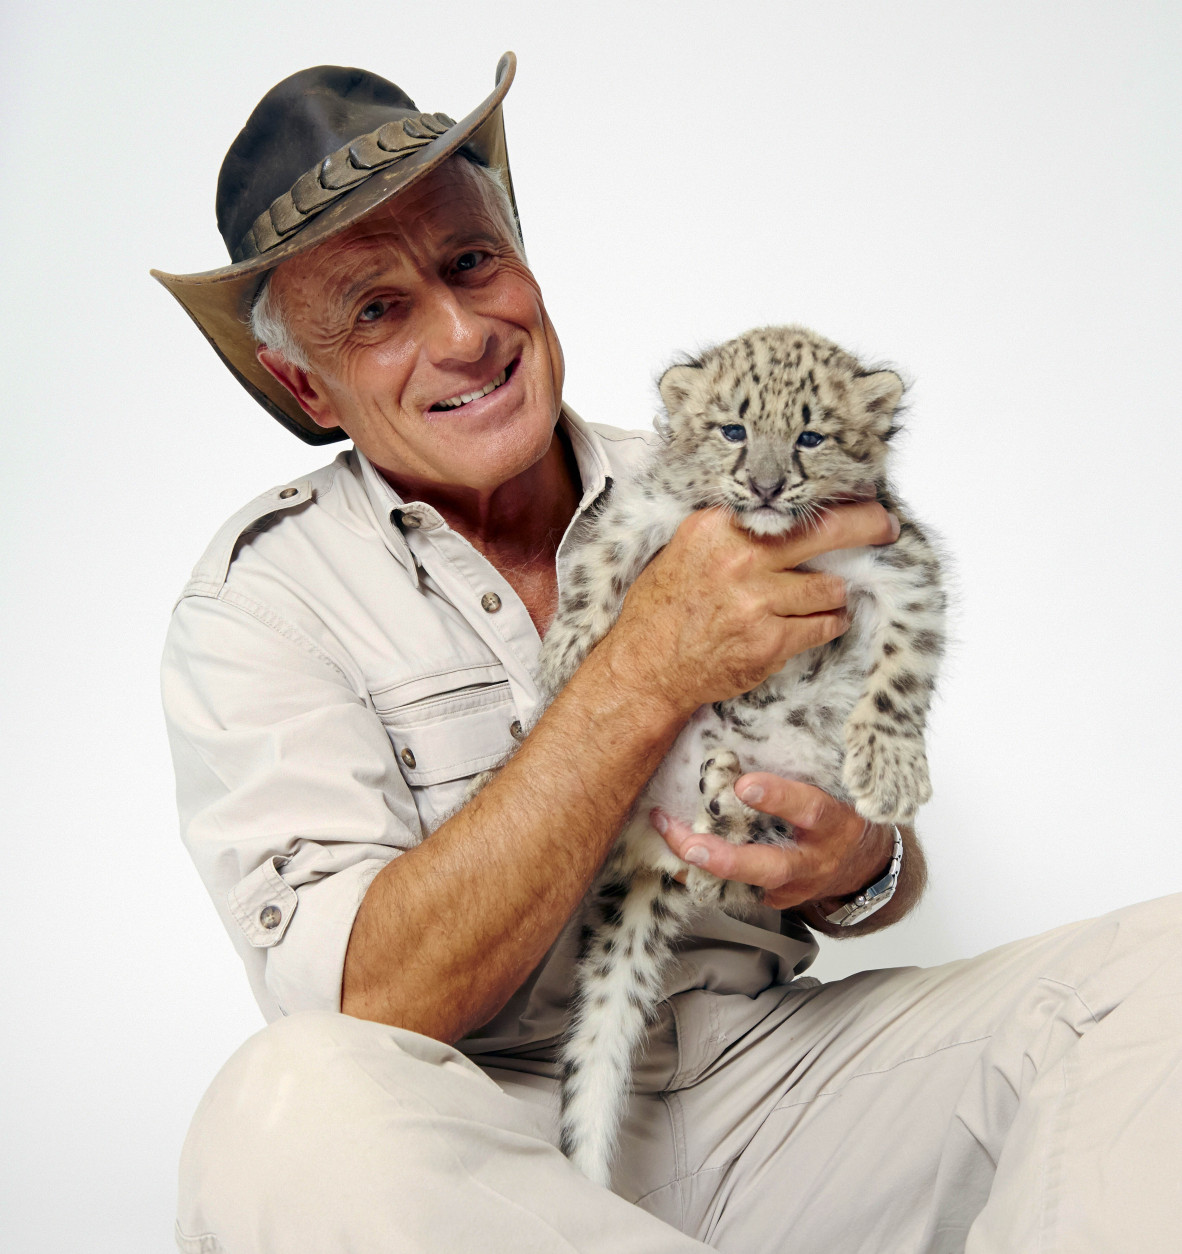 Wildlife advocate Jack Hanna poses for a portrait with a snow leopard cub on Monday, Oct. 12, 2015 in New York. (Photo by Dan Hallman/Invision/AP)